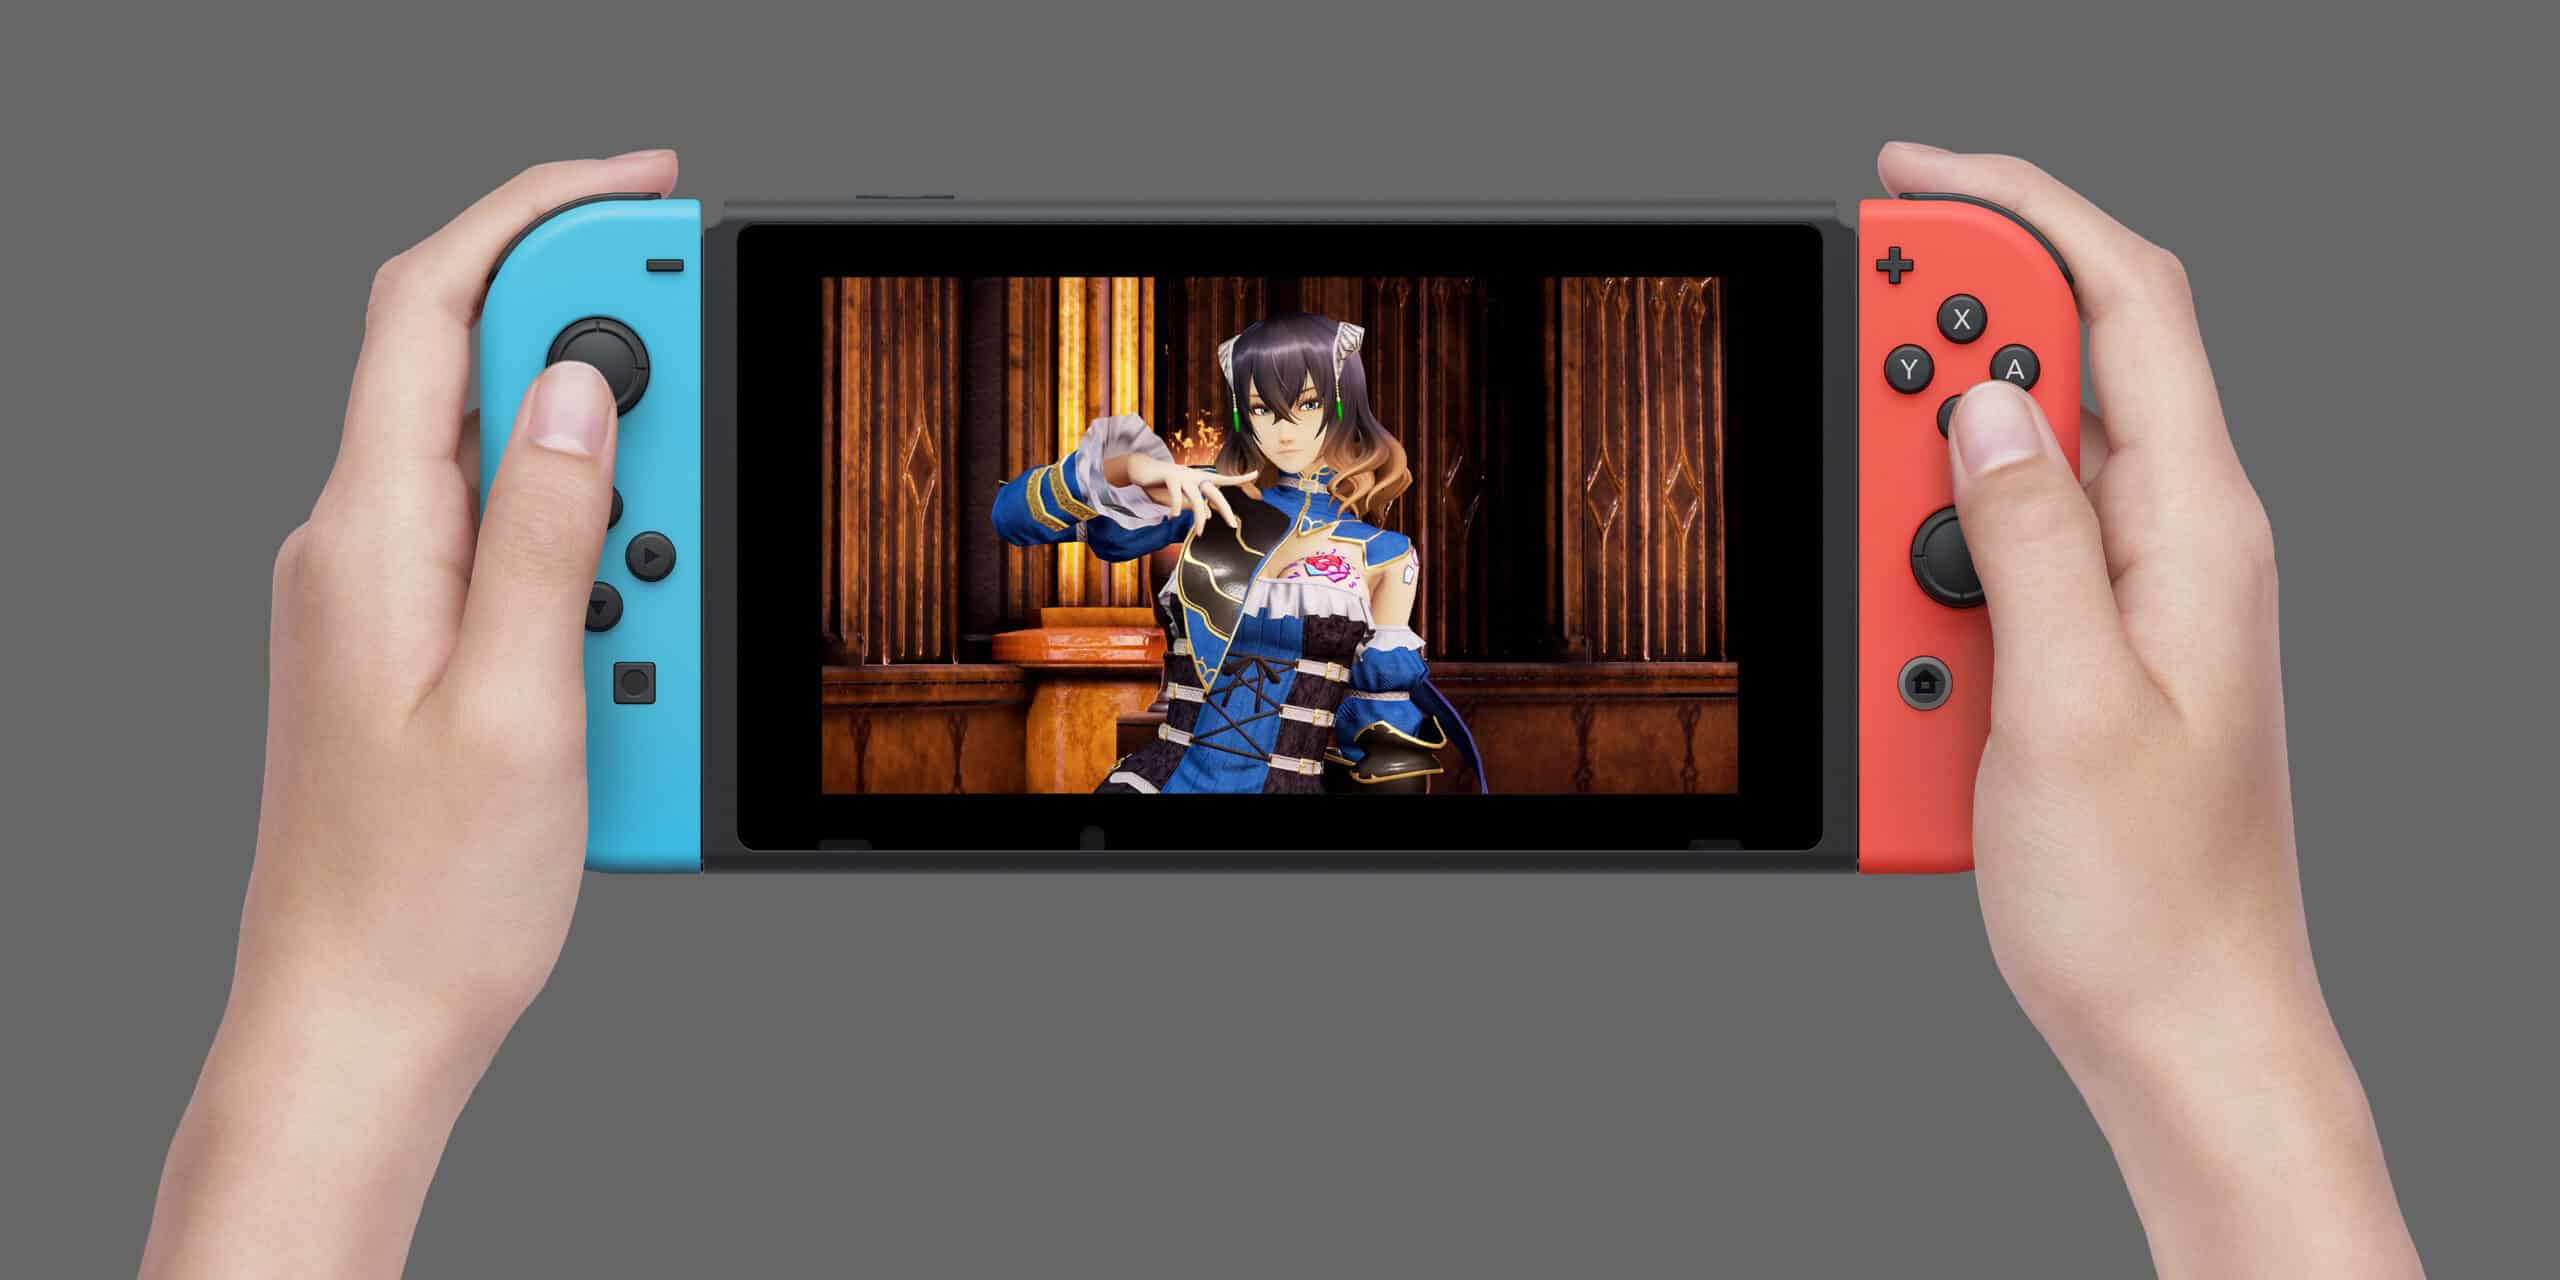 Bloodstained Switch